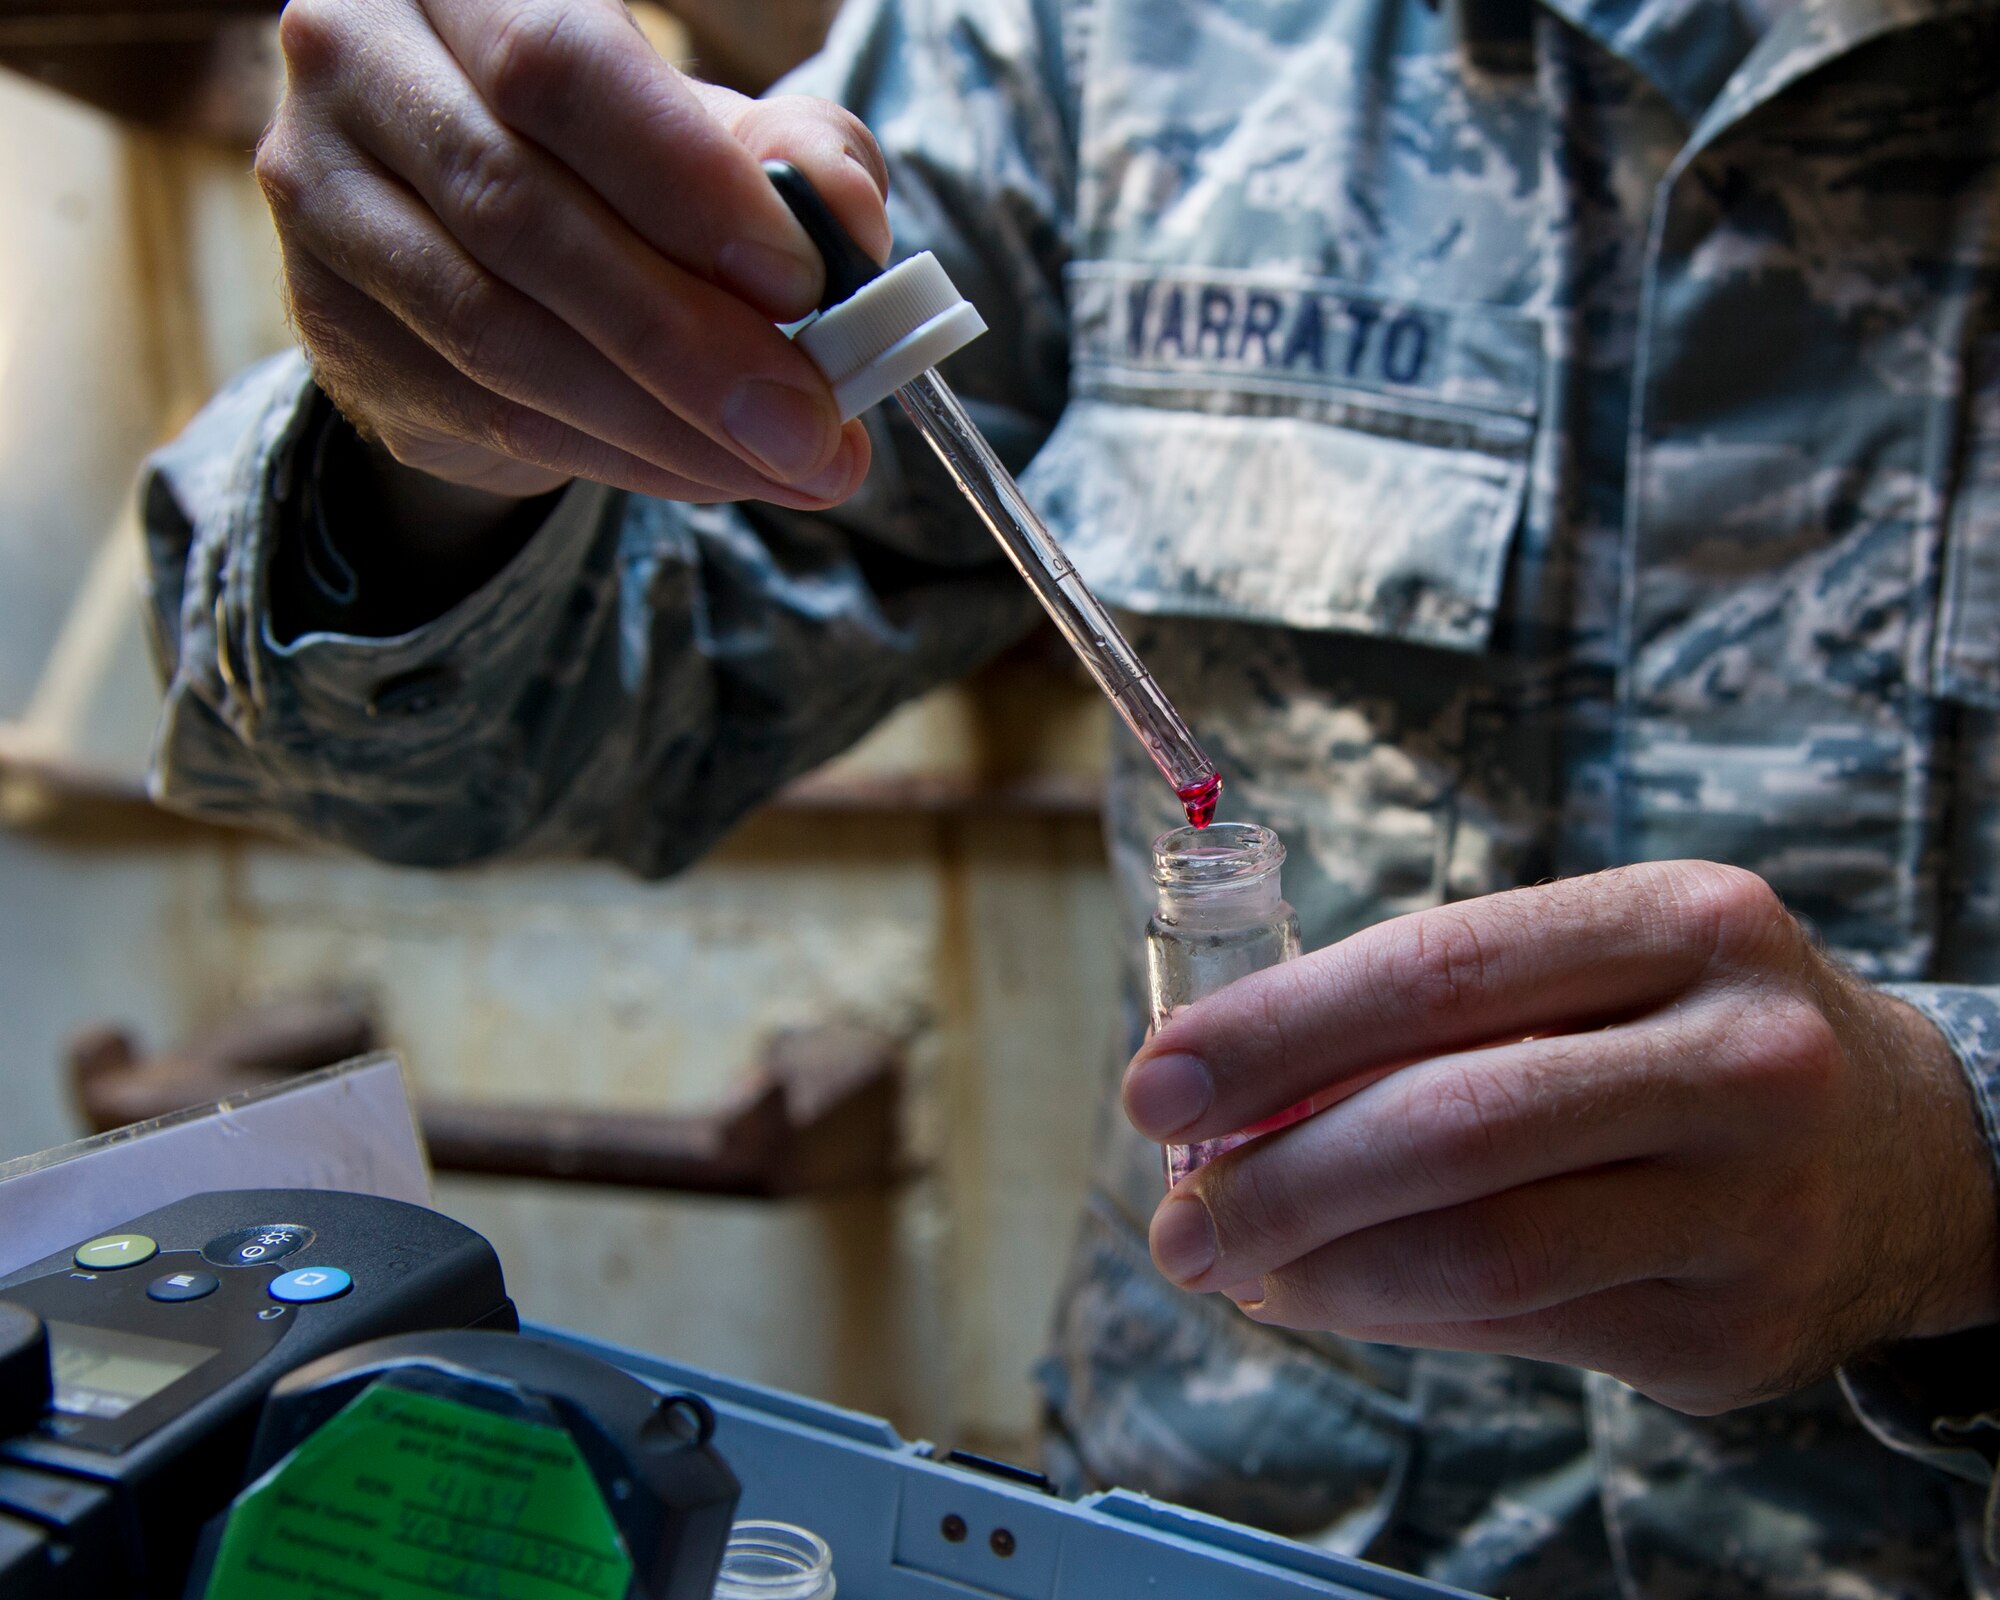 ALTUS AIR FORCE BASE, Okla. -- Staff Sgt. Marshall Varrato, 97th Medical Operations Squadron bioenvironmental engineering NCO in charge of readiness and training, adds Phenol Red Solution to a water sample during a routine water sampling on base. Phenol Red Solution is used to test Ph levels in the water. Members of the 97th MDOS bioenvironmental engineering flight conduct water samplings twice a month. The samples are collected and then delivered to a lab in Elk City, Okla. where they are tested for contaminants. (U.S. Air Force photo by Senior Airman Kenneth W. Norman / Released)